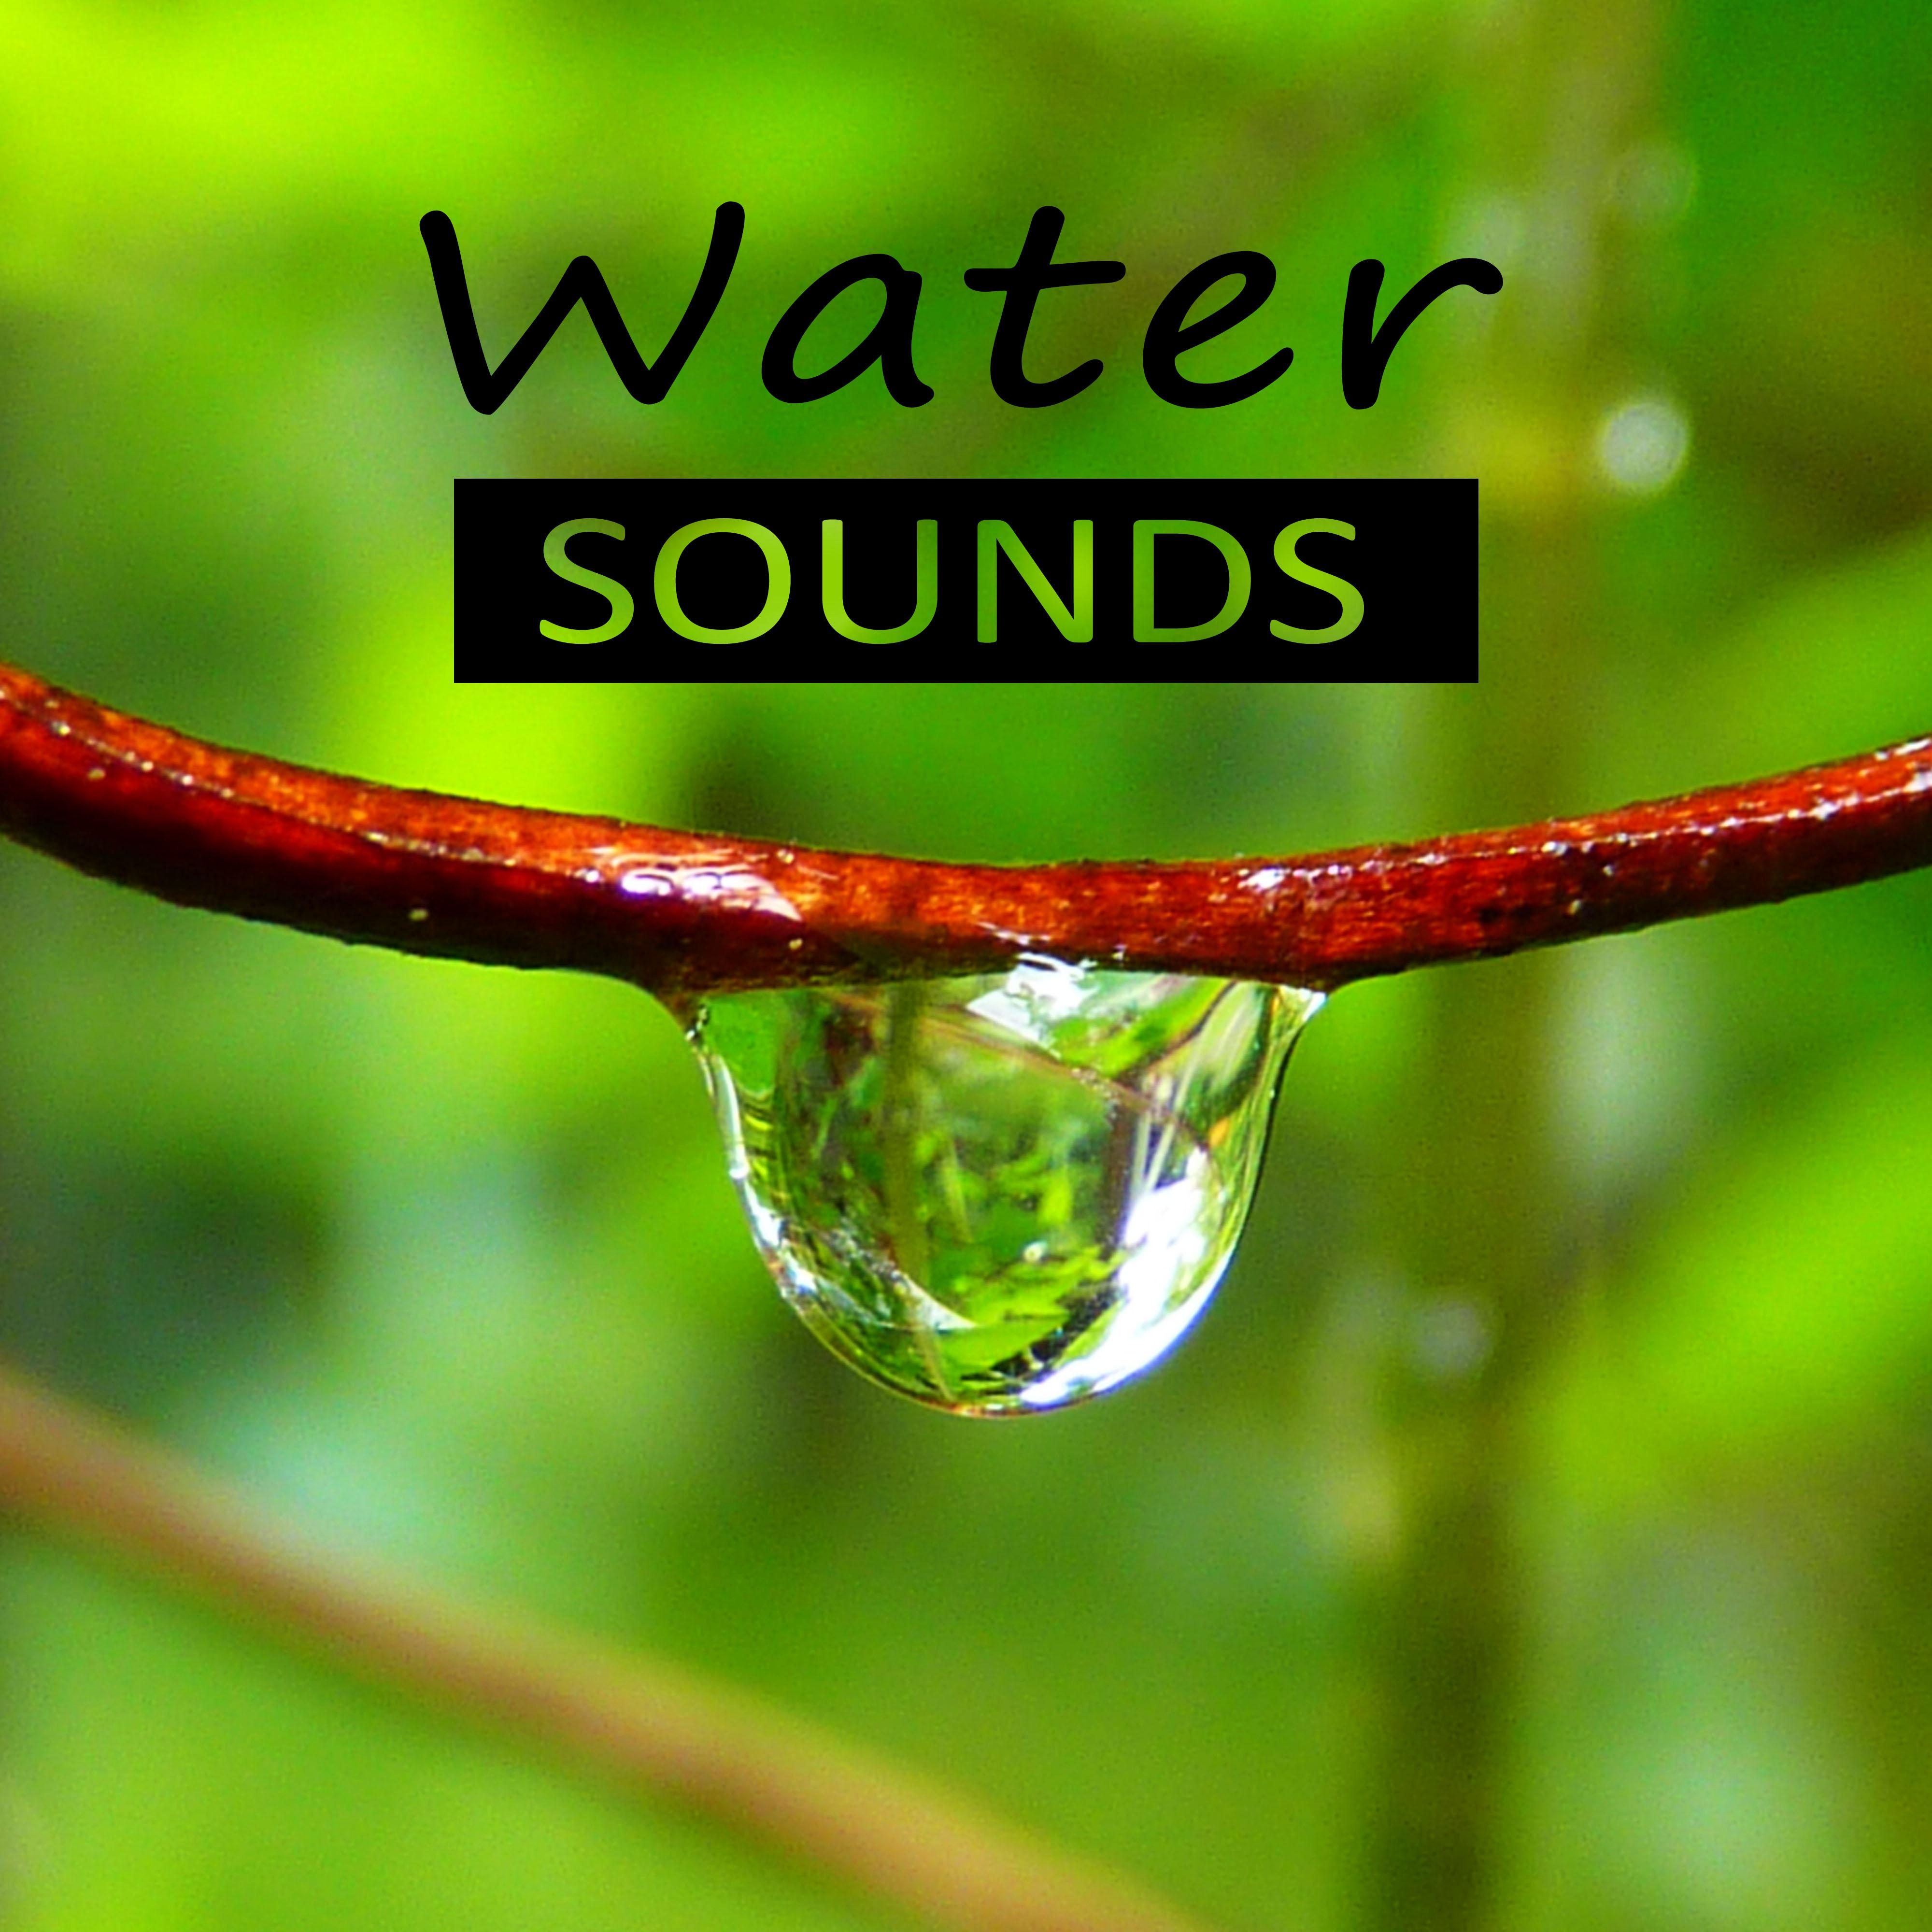 Water Sounds – Nature Sounds for Relax, Calmness, Feel Good, Easy Listening, Crystal World, Waves, Spa Music